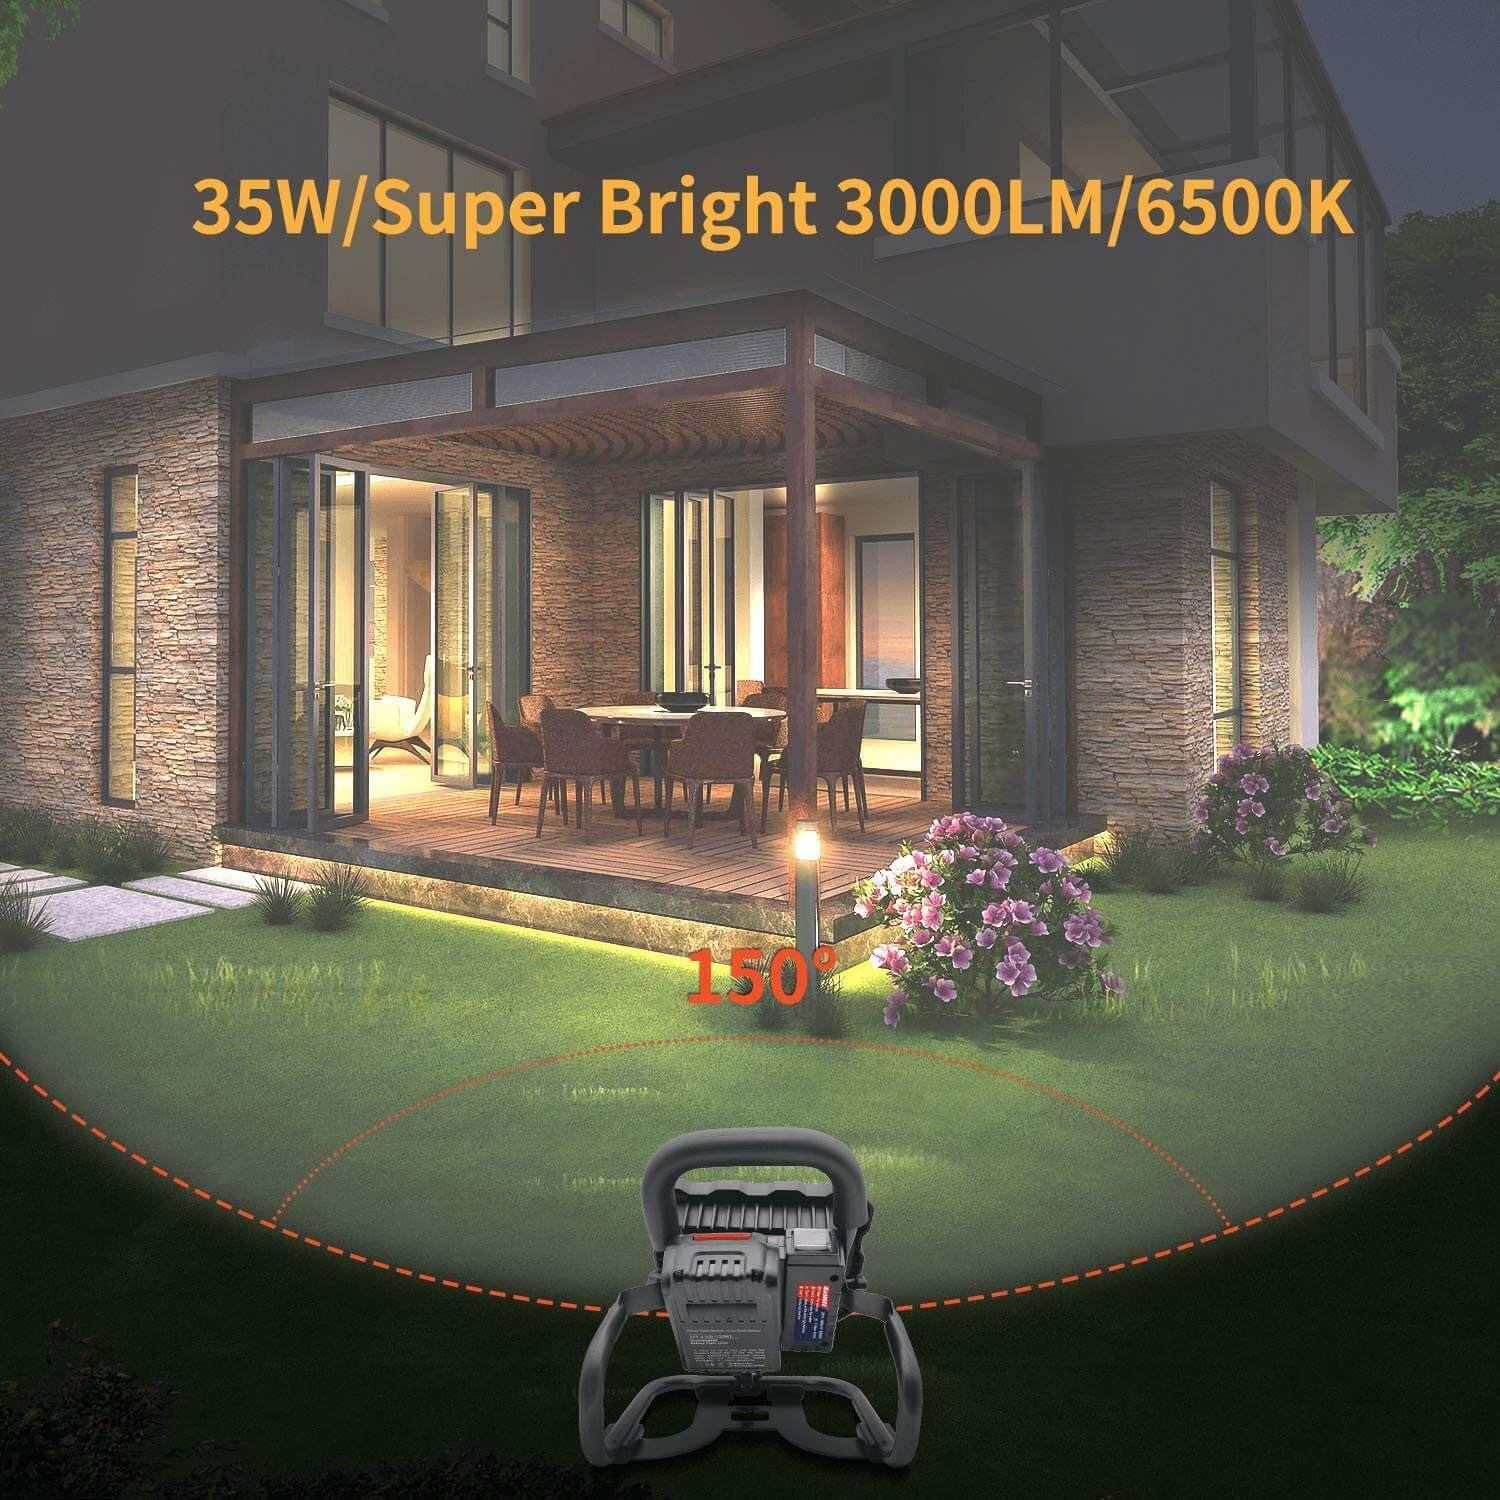 DASNITE Work Light, Portable LED Spot Light | Cordless 3000LM 35W With 2 Pack 5.0Ah For Black and Decker 20V LB2X4020 Battery